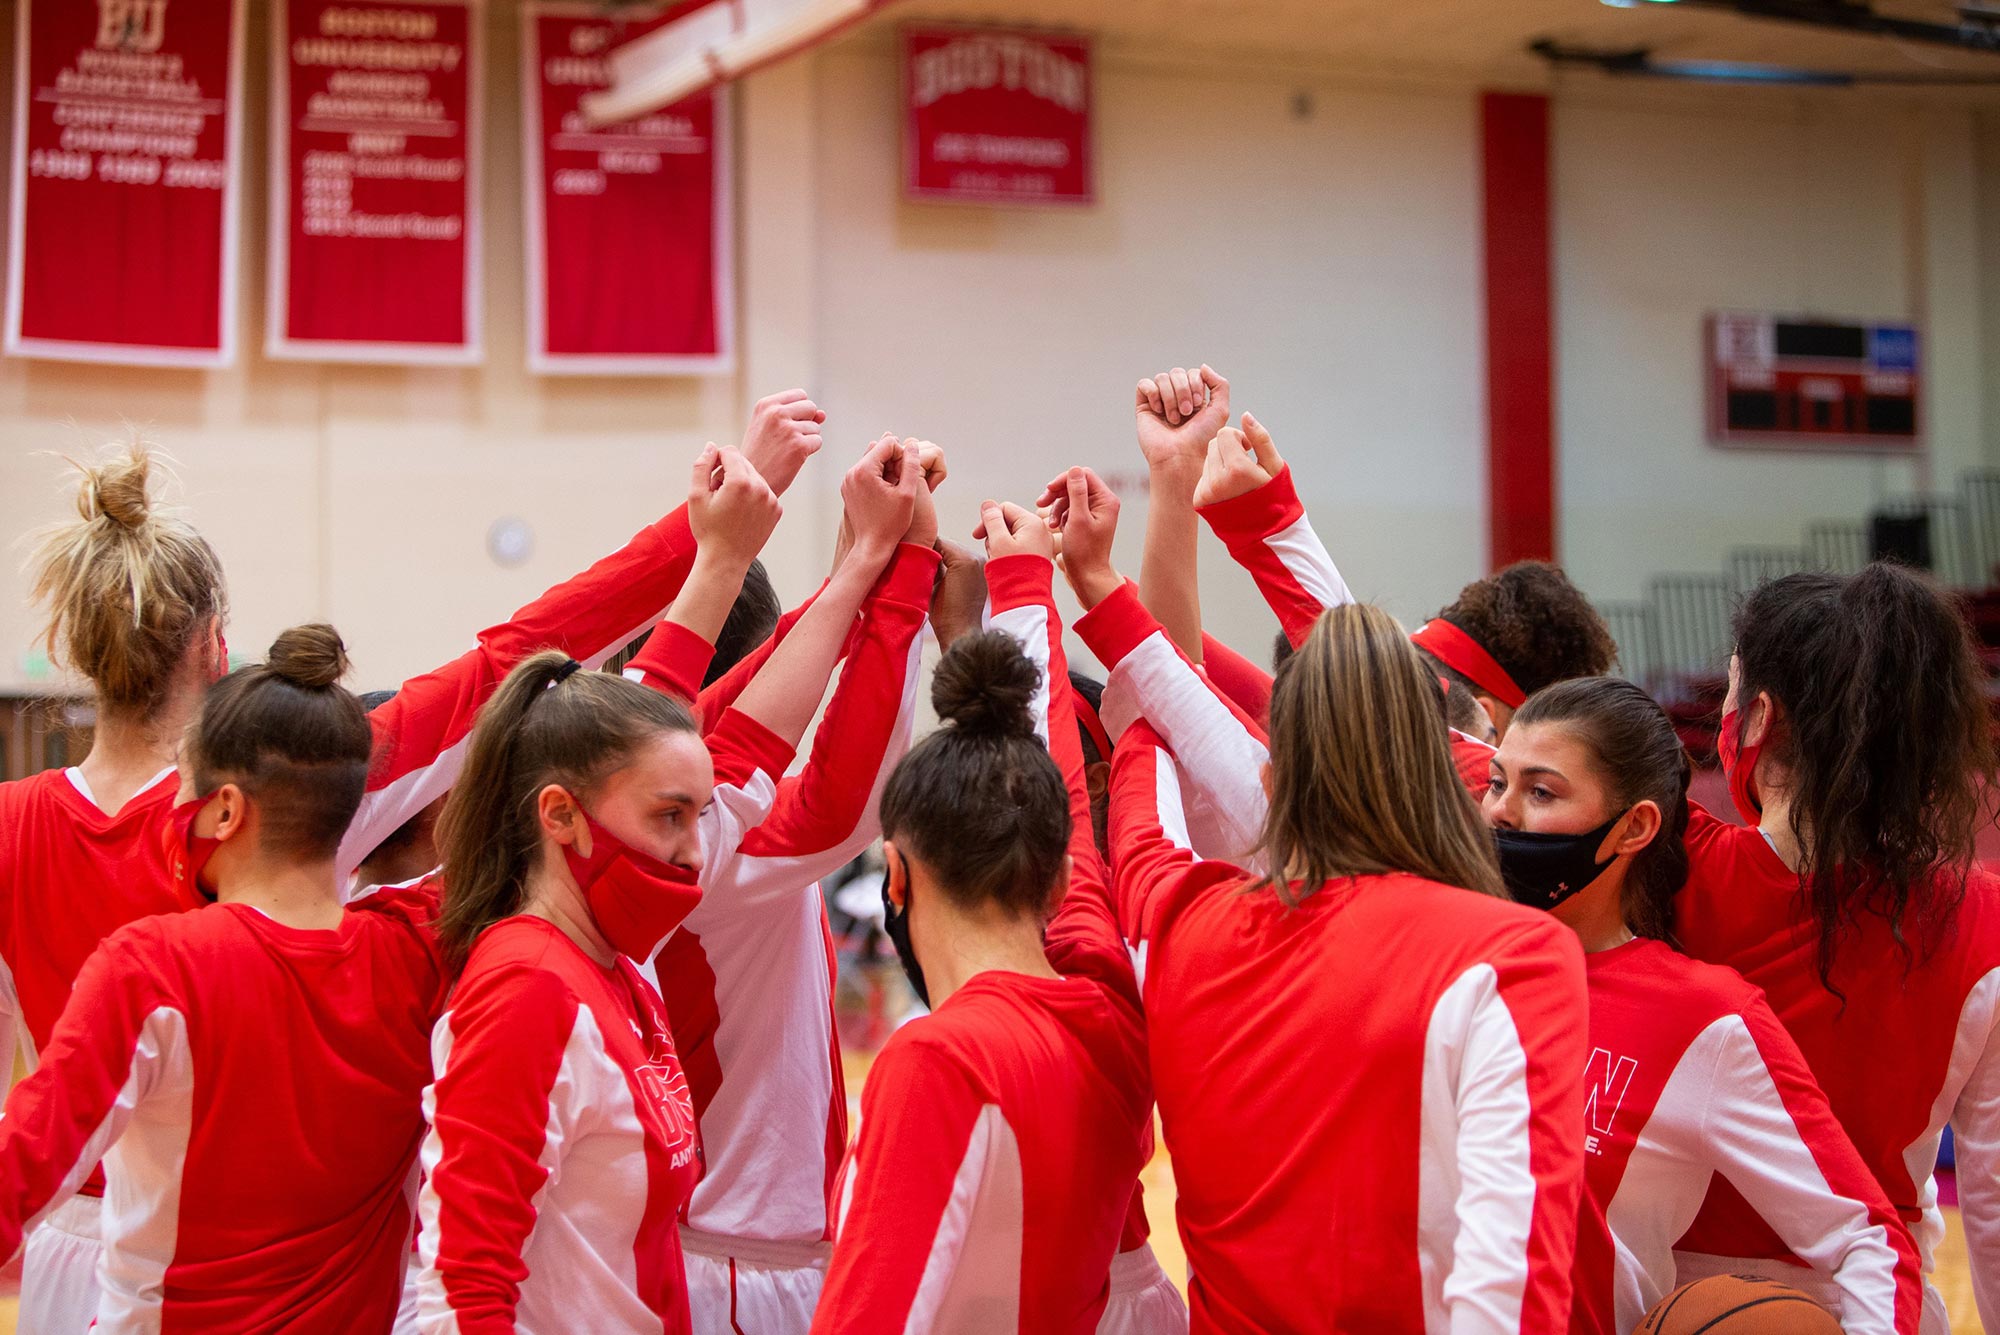 Photo of the BU women’s basketball team with their hands raised in the air during what looks like a time out. They wear red and white long sleeve shirts and face masks.